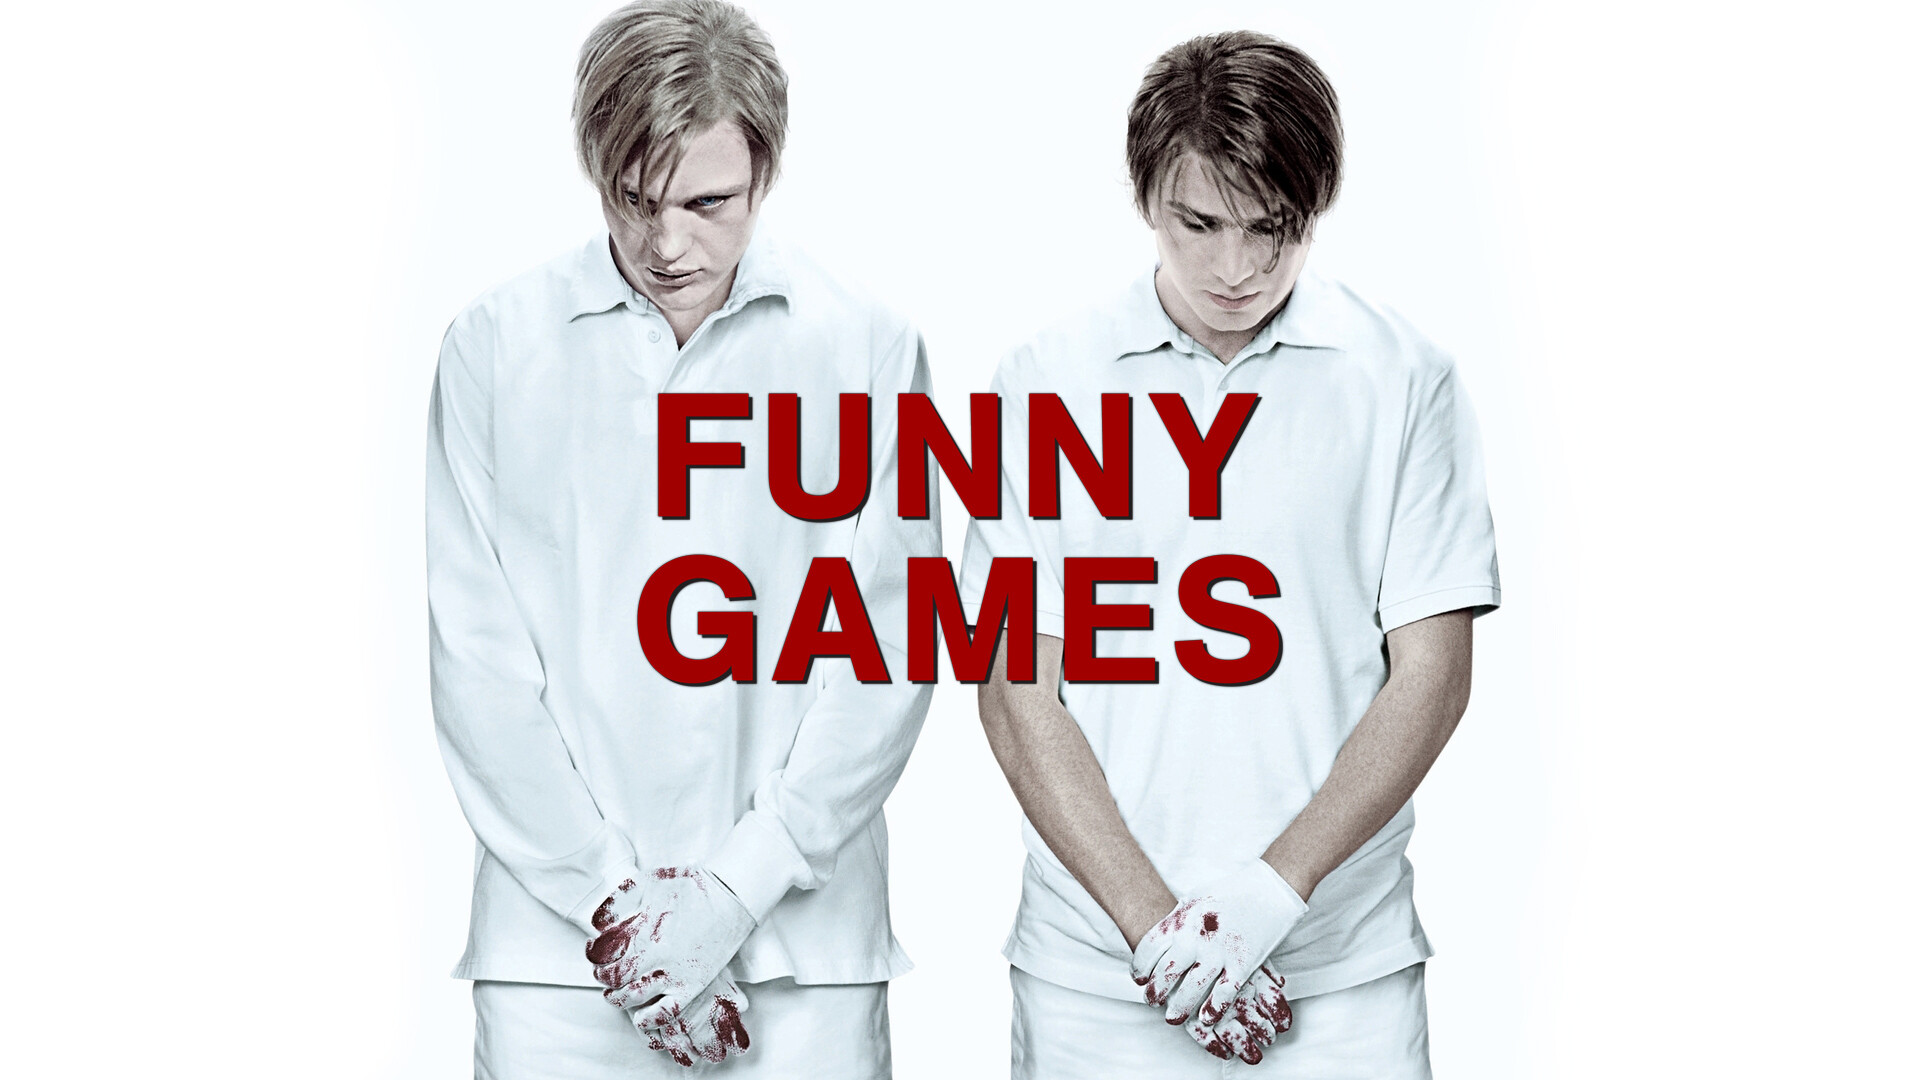 43-facts-about-the-movie-funny-games